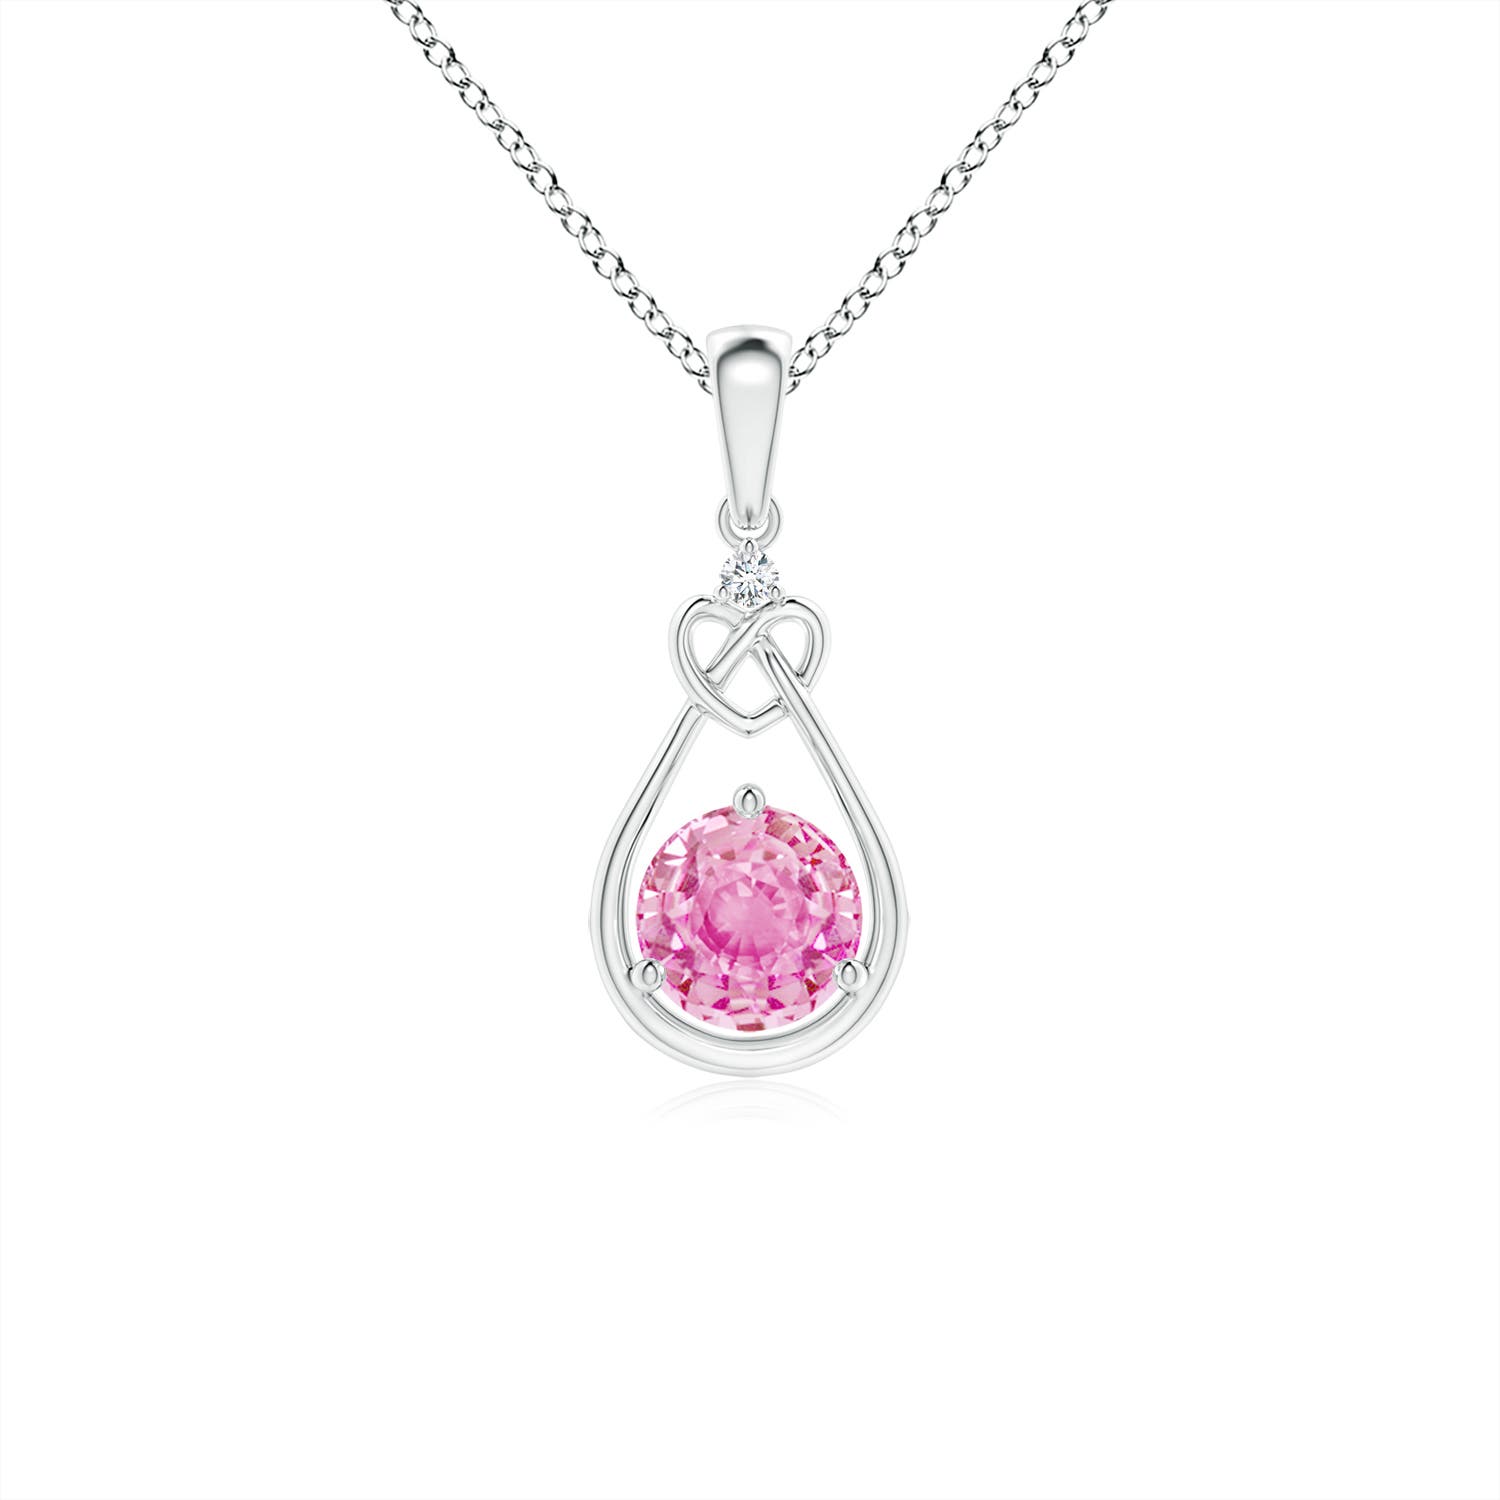 A - Pink Sapphire / 0.61 CT / 14 KT White Gold